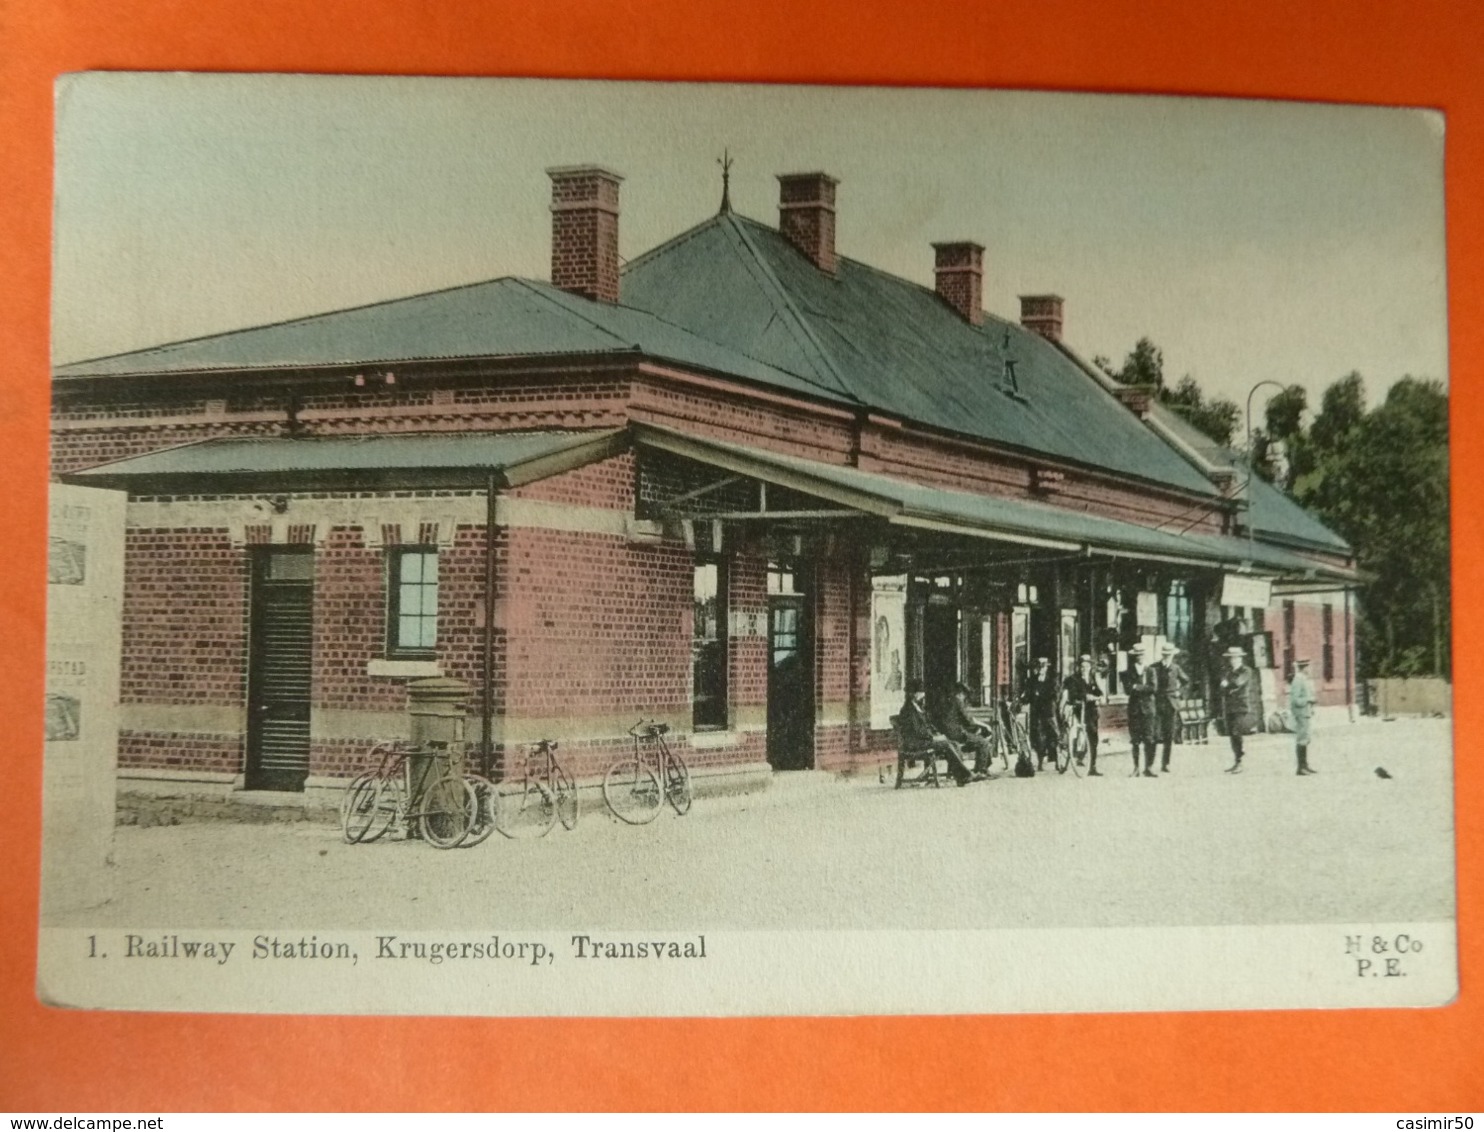 KRUGERSDORP TRANSVAAL RAILWAY STATION - South Africa